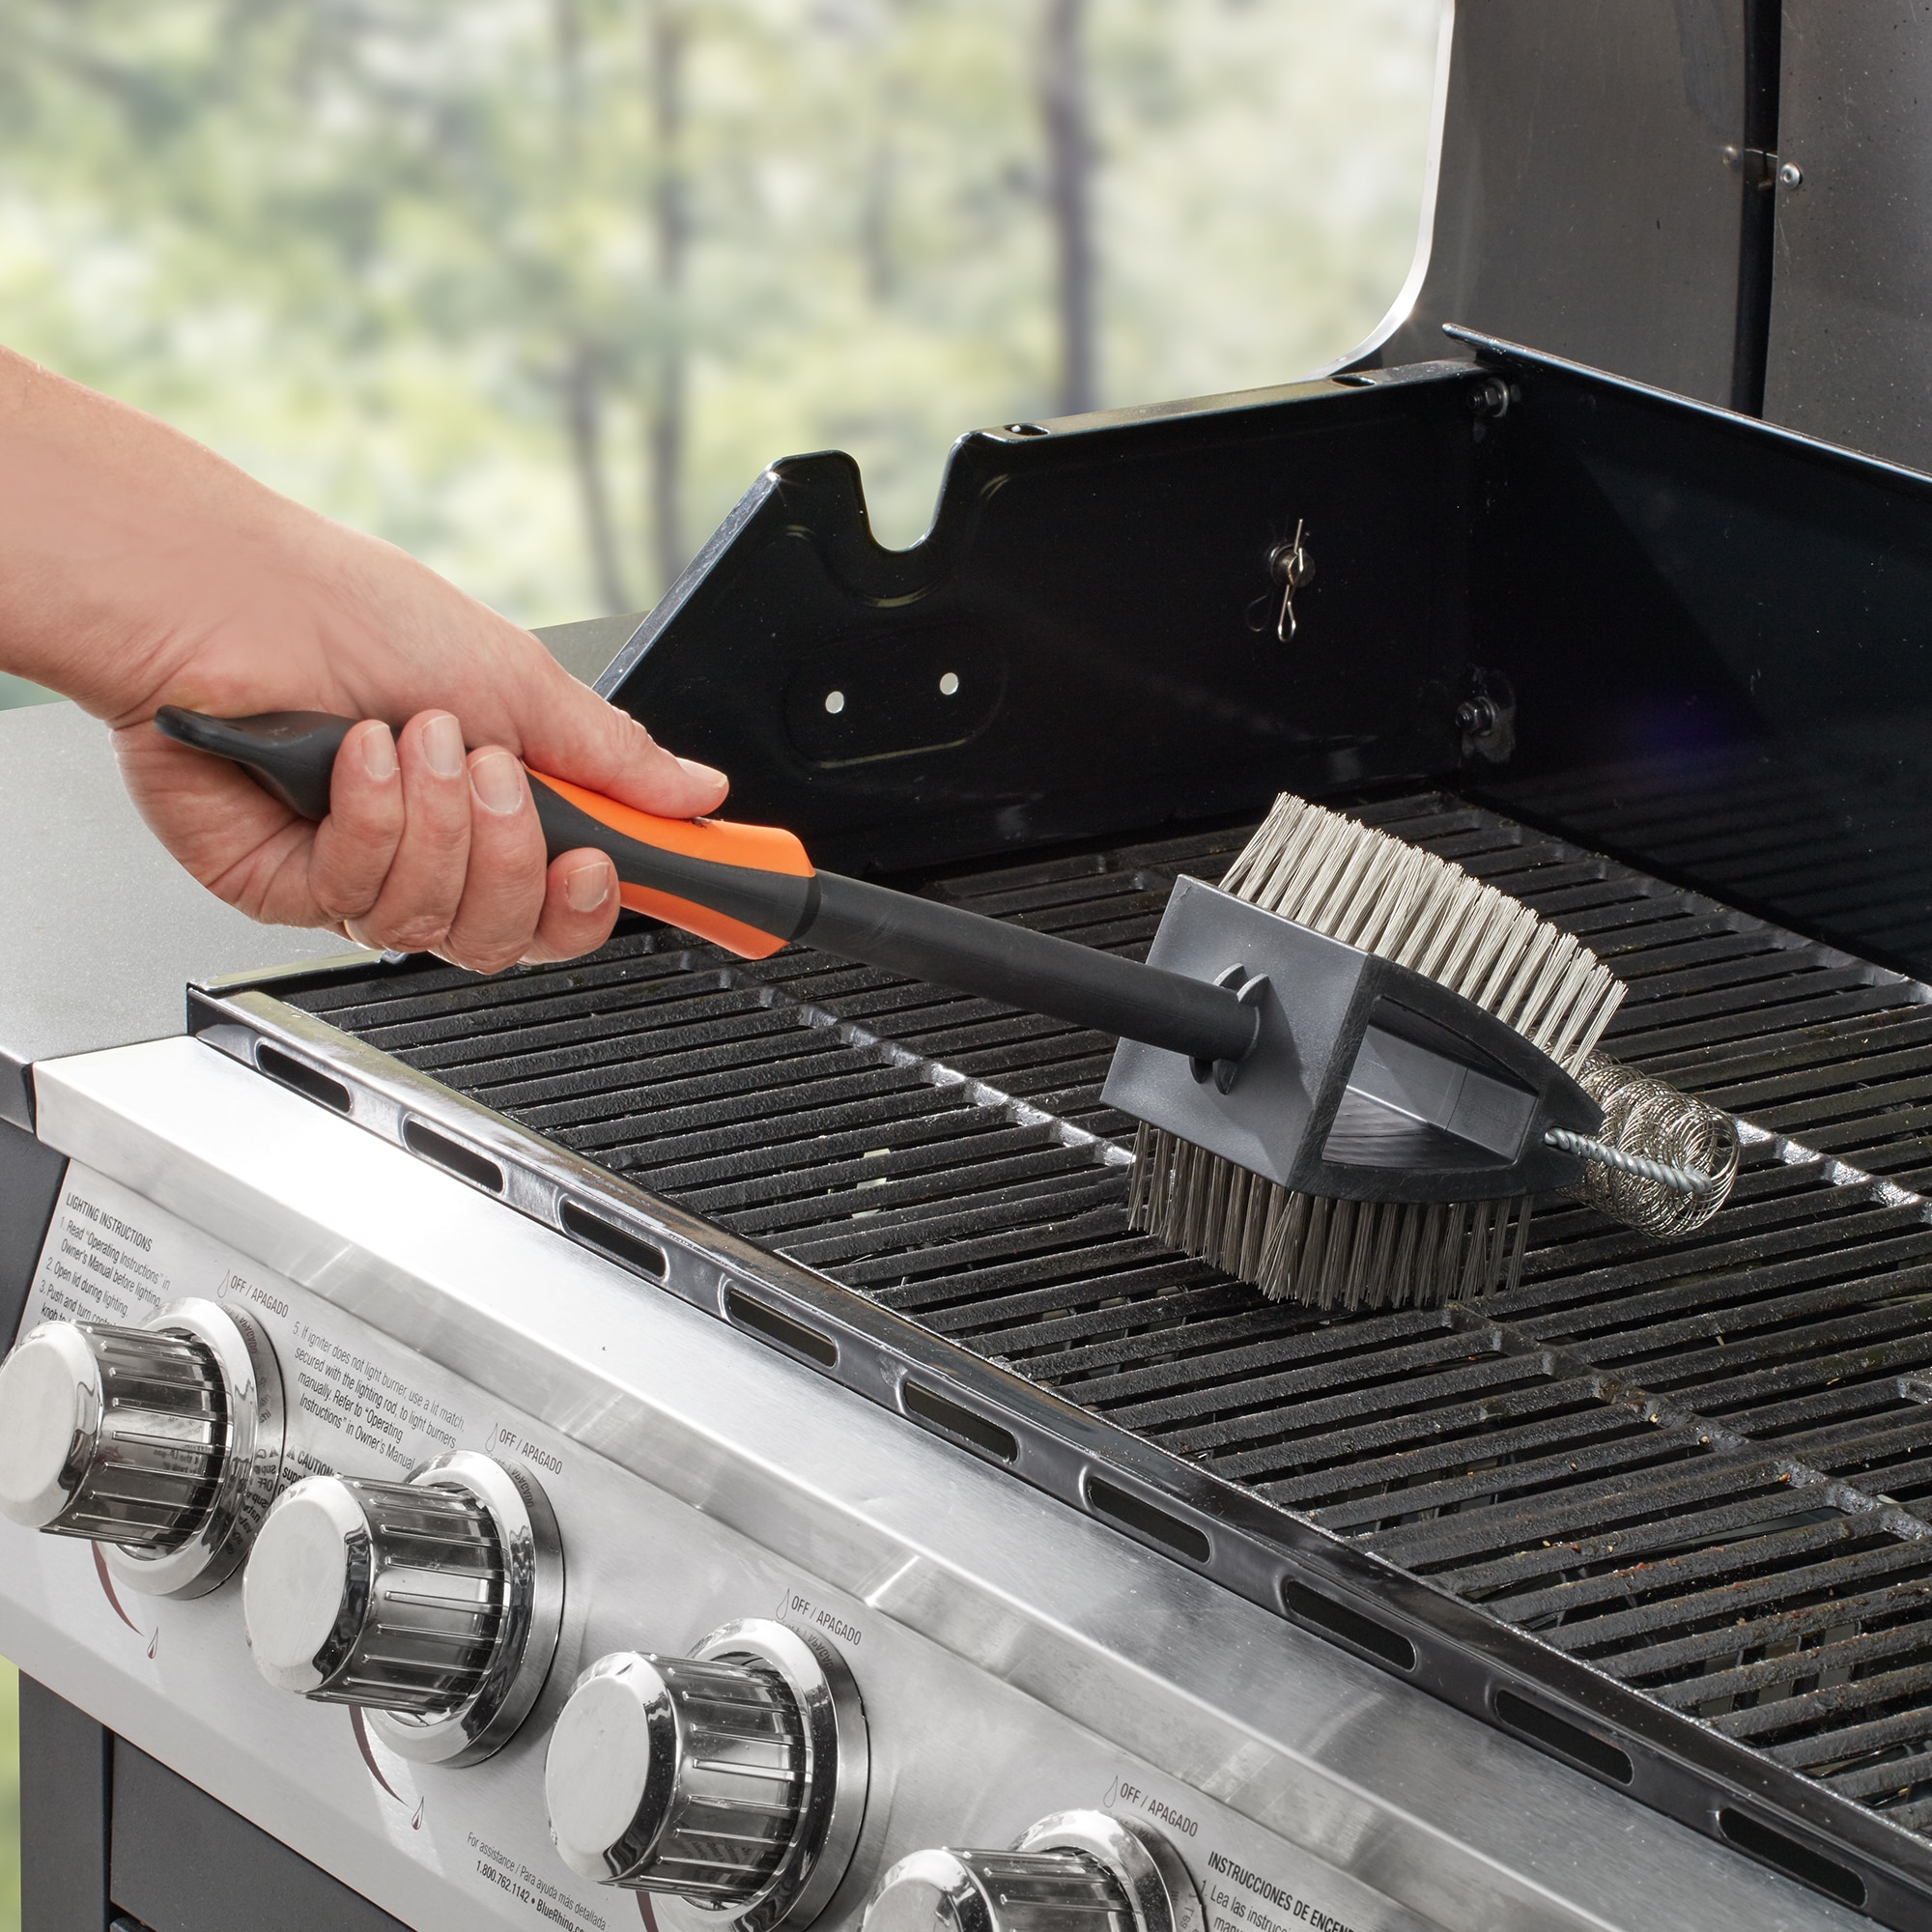 Armor All Grills & Outdoor Cooking at